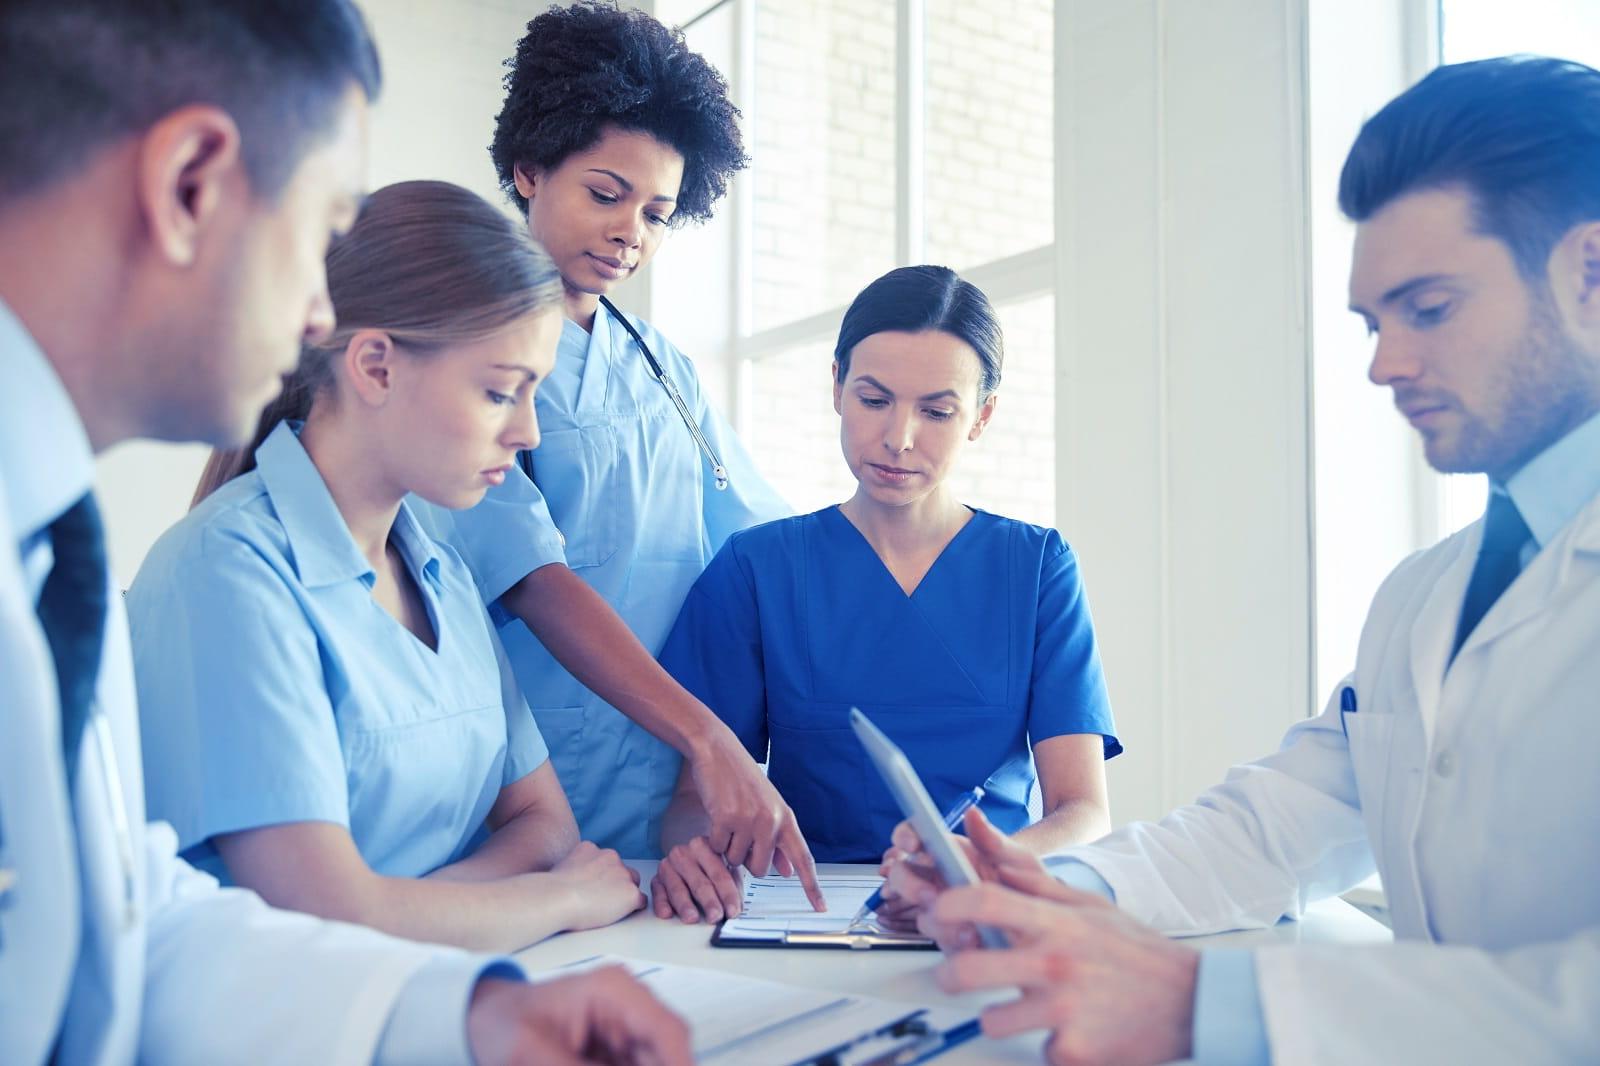 stock photo of group of medical workers looking at data